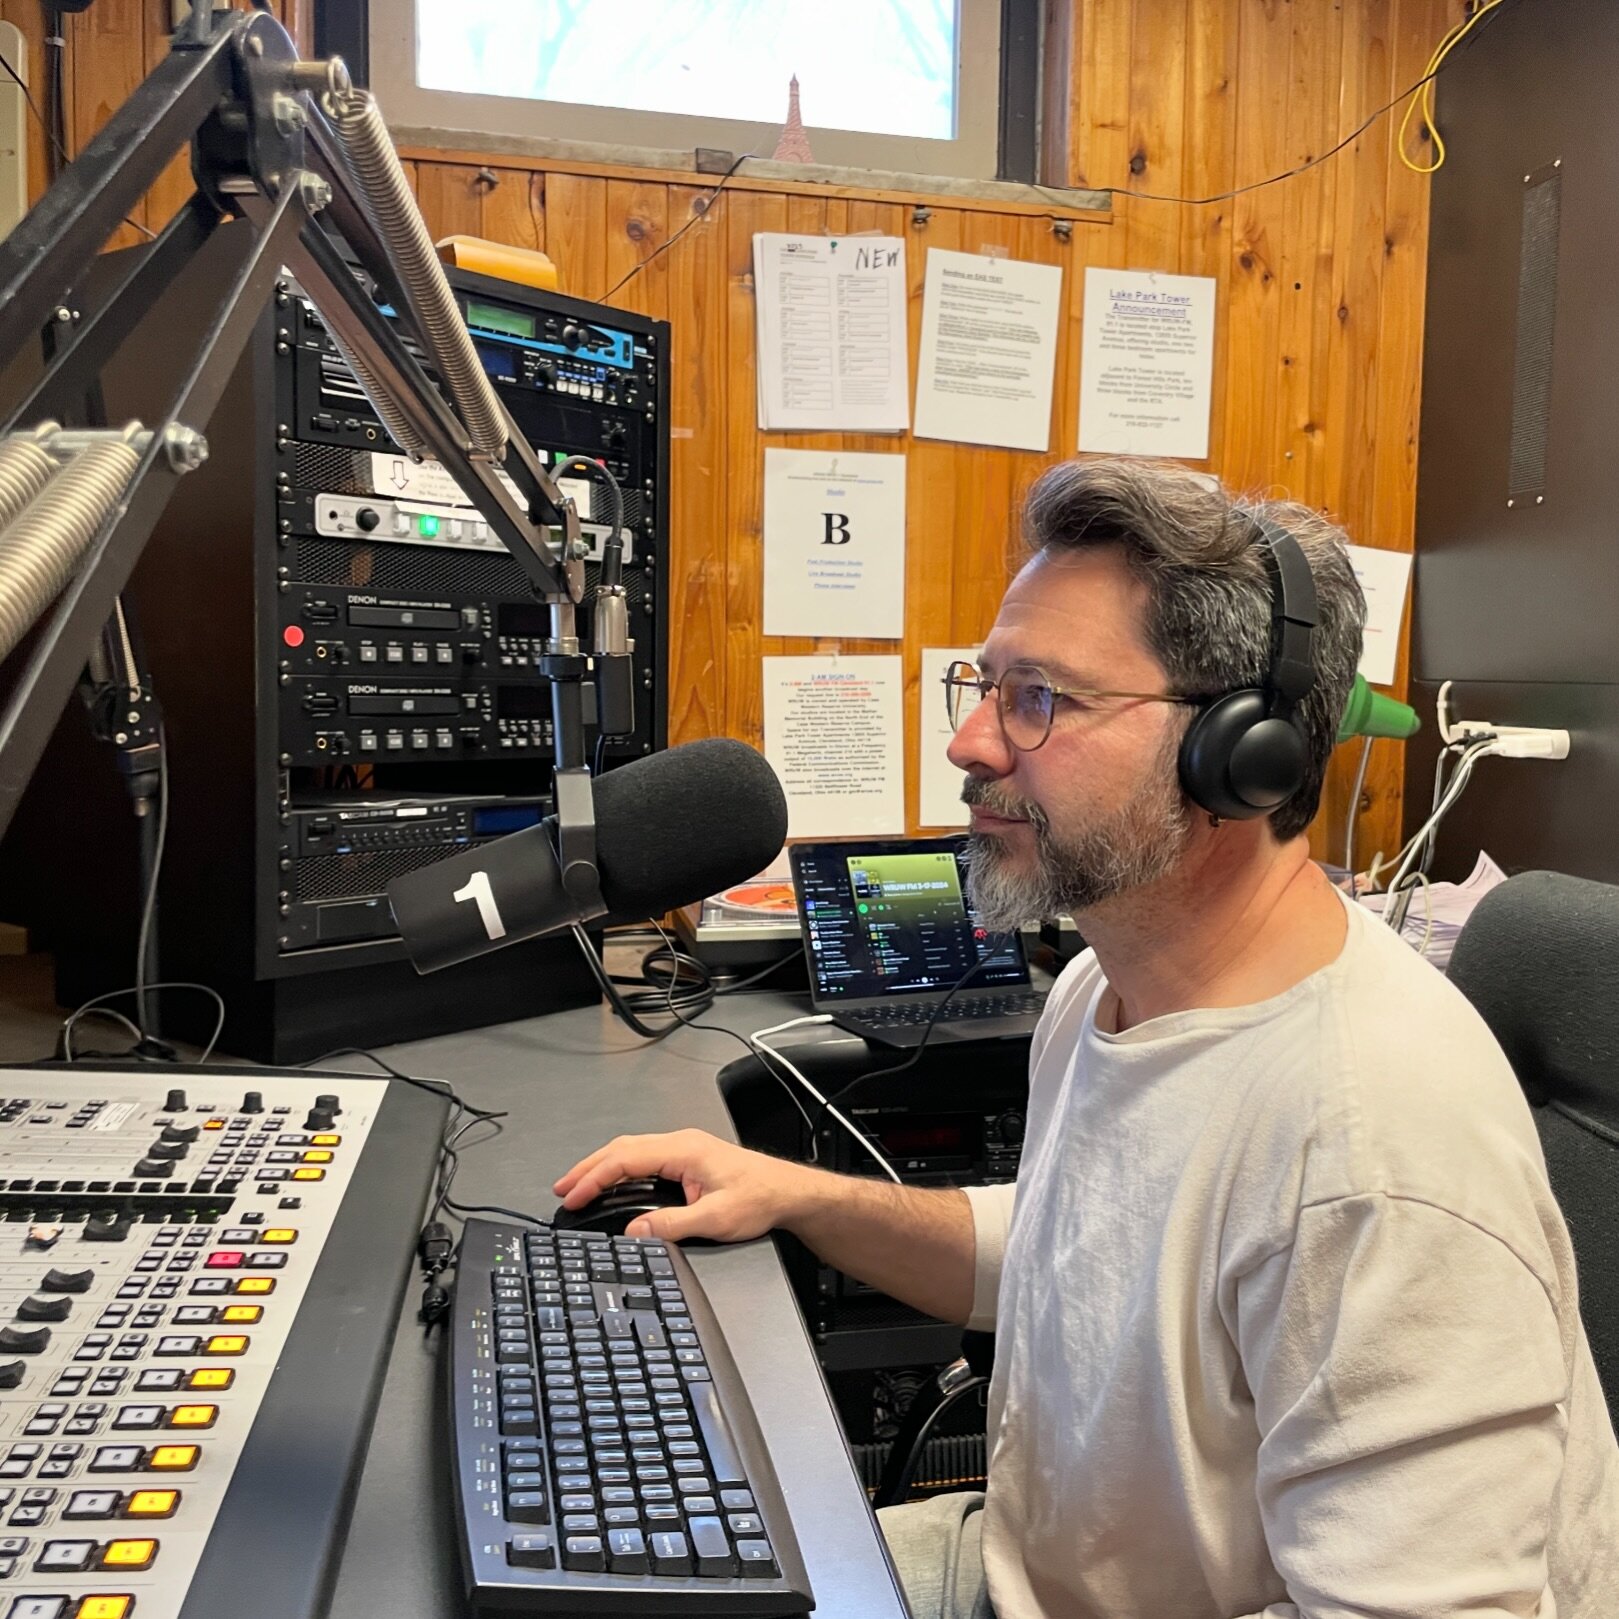 There&rsquo;s something incredibly satisfying, almost therapeutic, in the act of playing music for other people. Apprenticing at @wruwfm, look out for that dub show on air soon! #collegeradio #radiodj